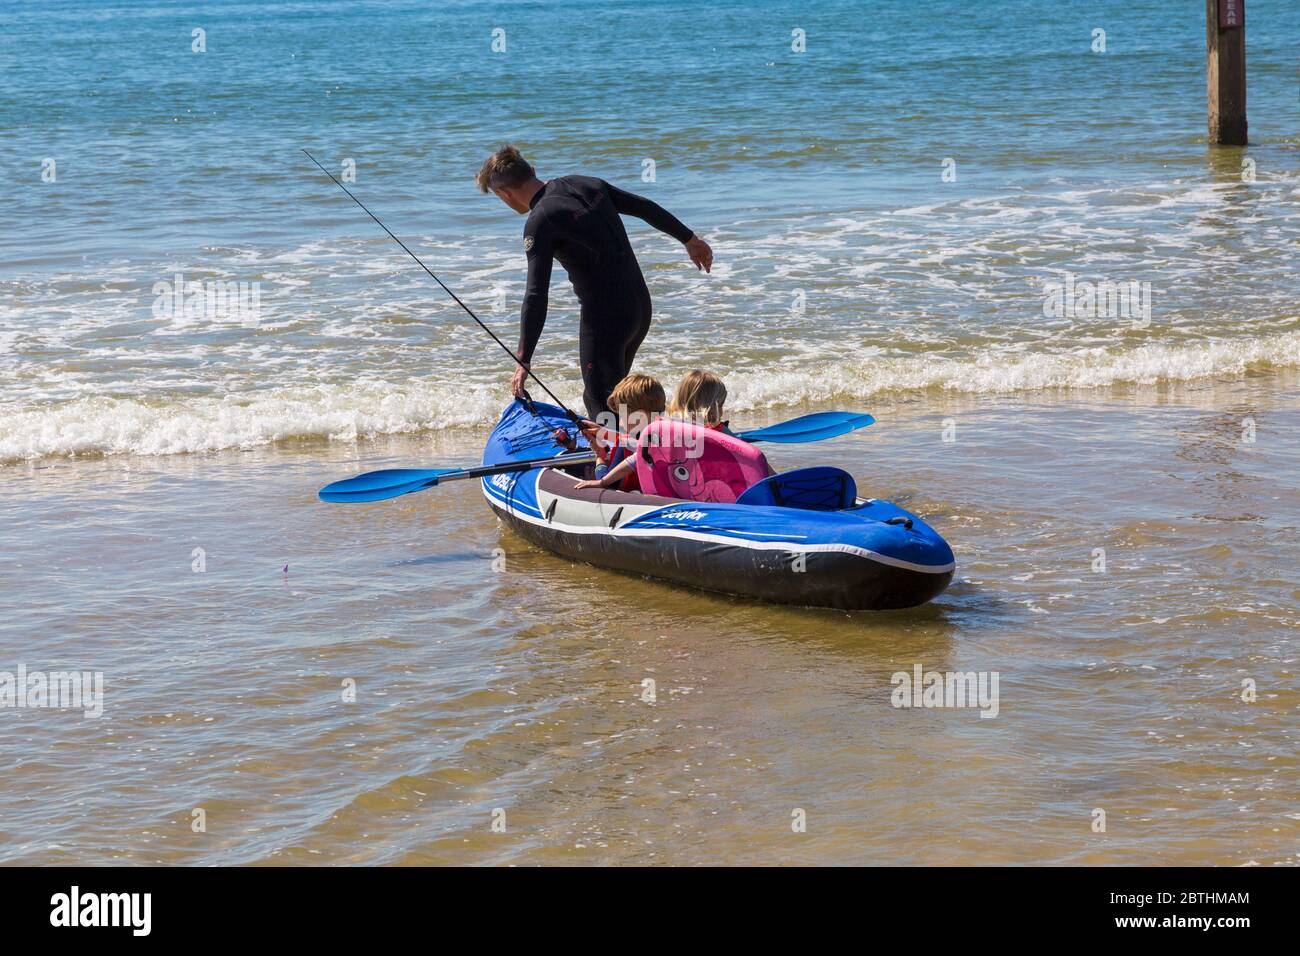 Bournemouth, Dorset UK. 26th May 2020. UK weather: another hot sunny day at Bournemouth beaches with clear blue skies and unbroken sunshine, as the glorious weather continues and temperatures rise. Sunseekers head to the seaside to enjoy the sunshine. Henry and Olivia, 6 and 5, go kayak fishing in the sea.  Credit: Carolyn Jenkins/Alamy Live News Stock Photo